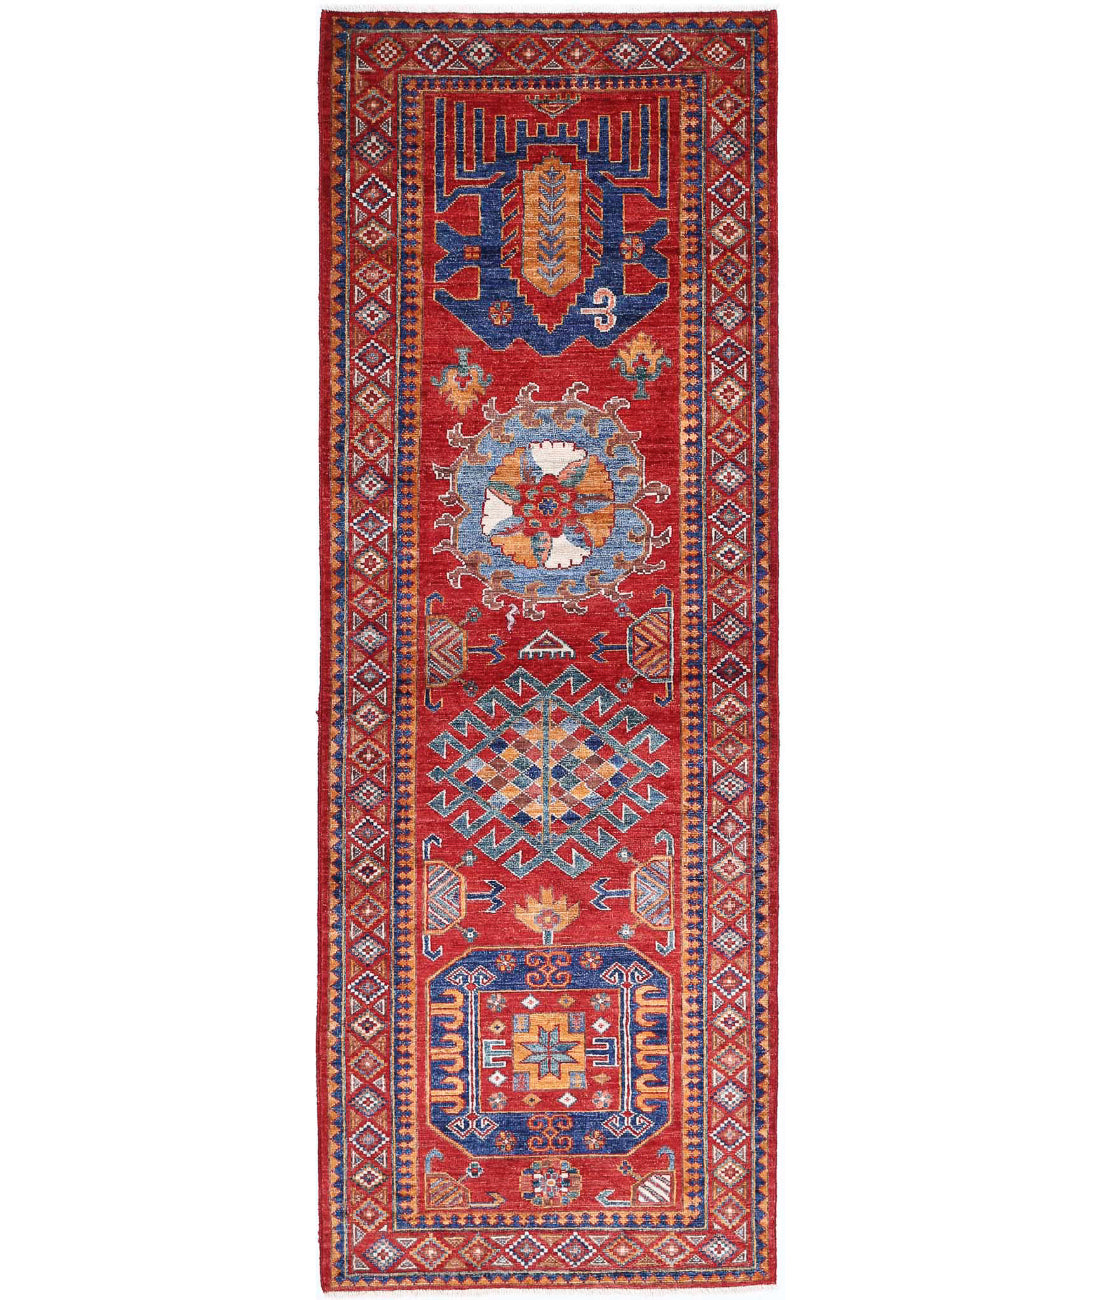 Hand Knotted Nomadic Caucasian Humna Wool Rug - 2'9'' x 7'11'' 2'9'' x 7'11'' (83 X 238) / Red / Gold